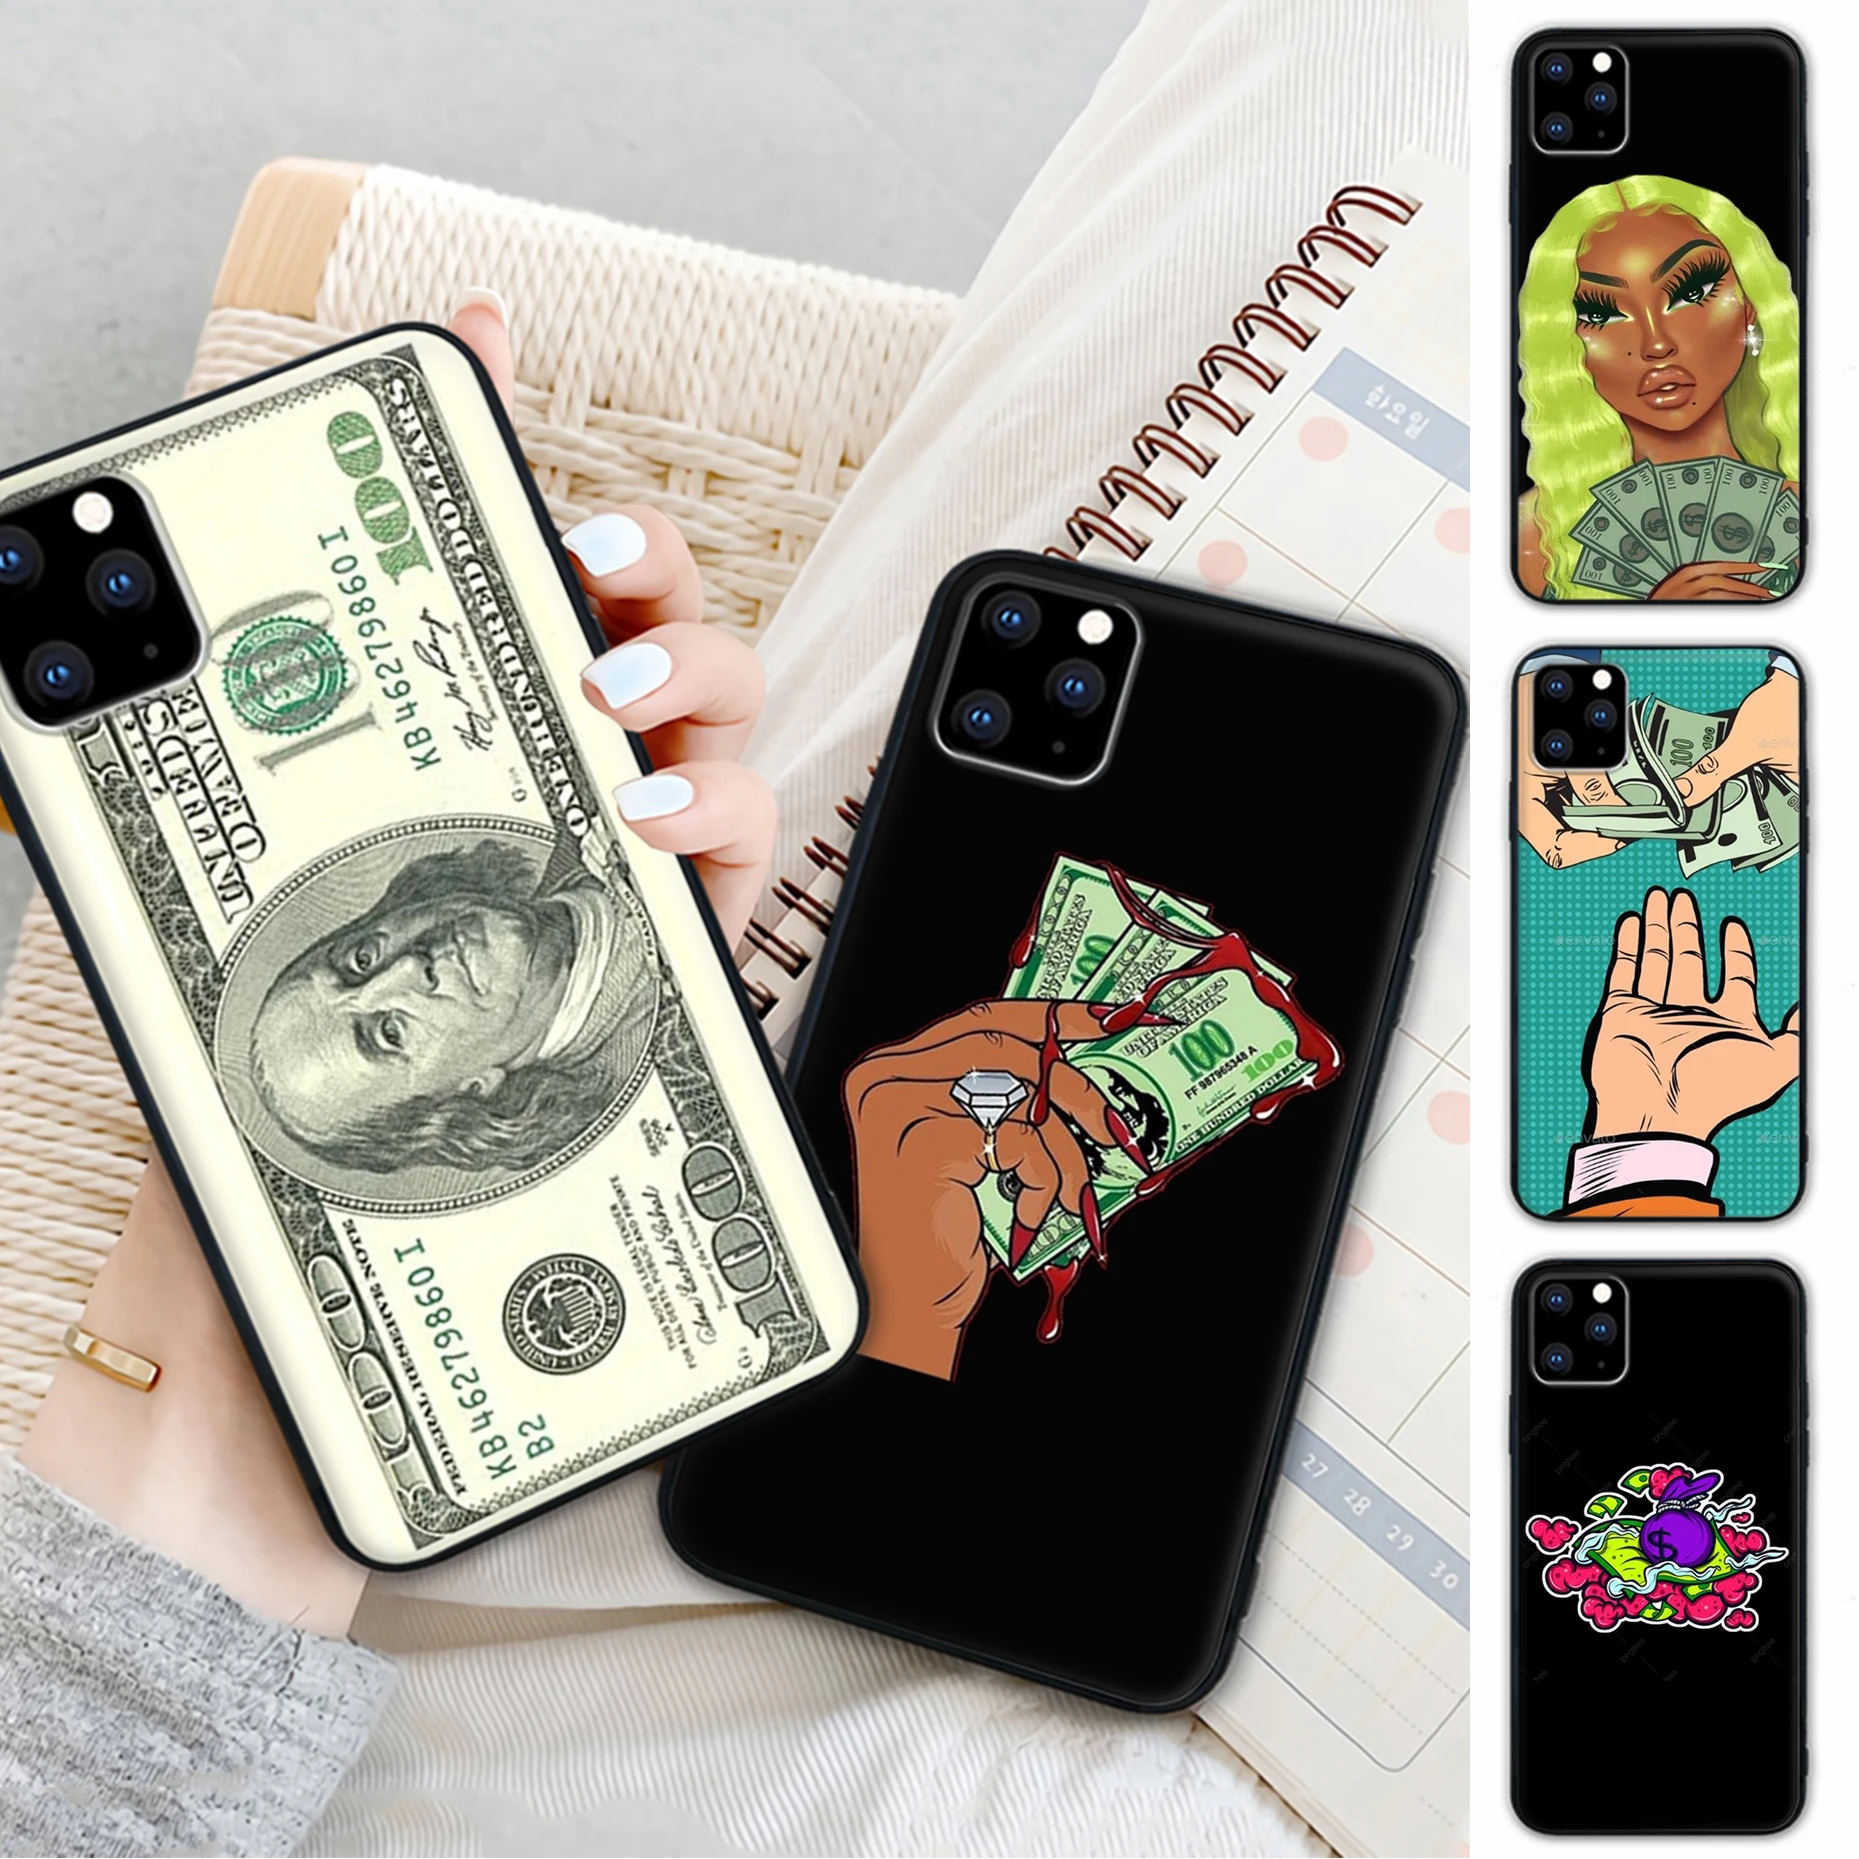 

Hot Sell 100 Dollars With Black Girl Cellphone Cover Case For Samsung Galaxy M30S A01 A21 A31 A51 A71 A91 A10S A20S A30S A50S